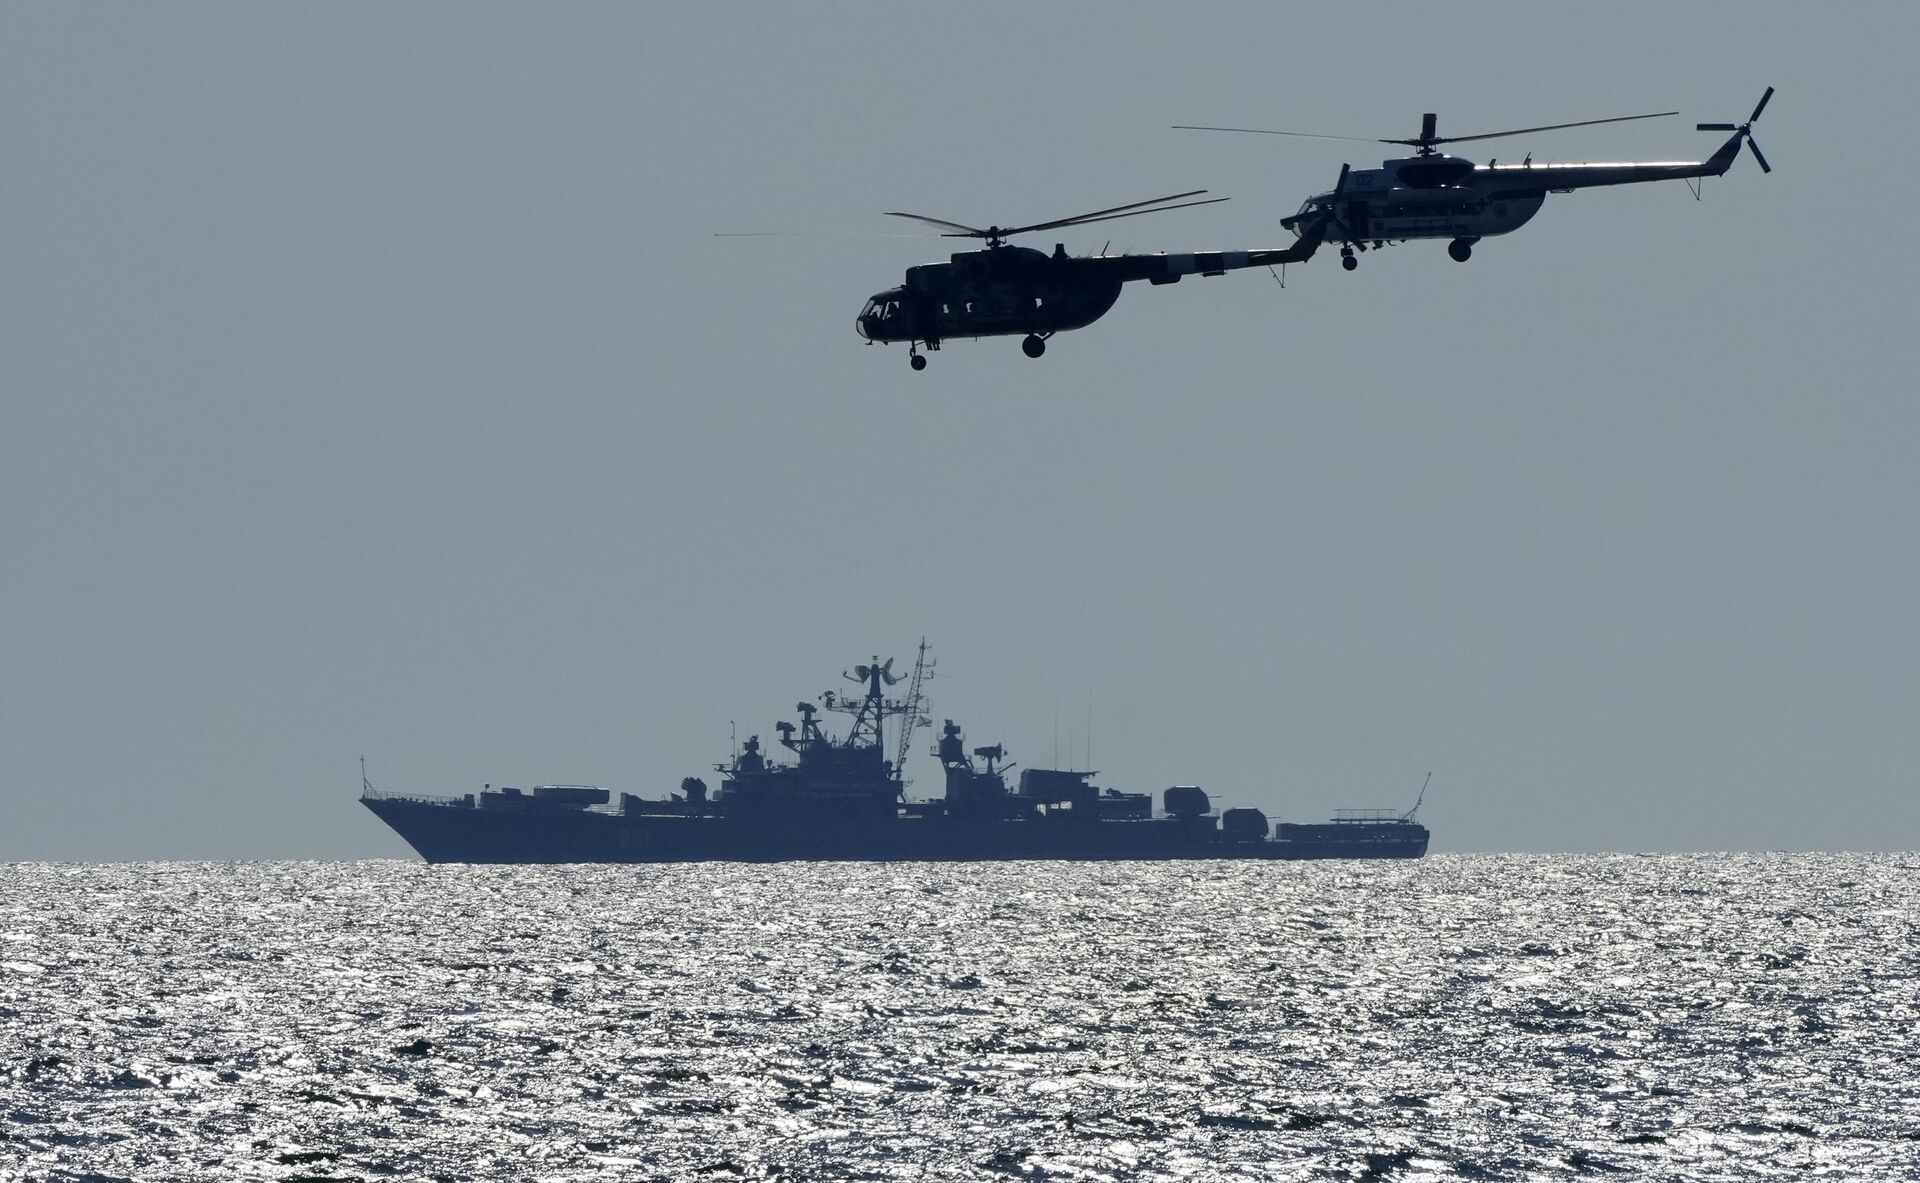 Ukrainian helicopters fly over a Russian warship  during Sea Breeze 2021 maneuvers, in the Black Sea, Friday, July 9, 2021 - Sputnik International, 1920, 07.09.2021